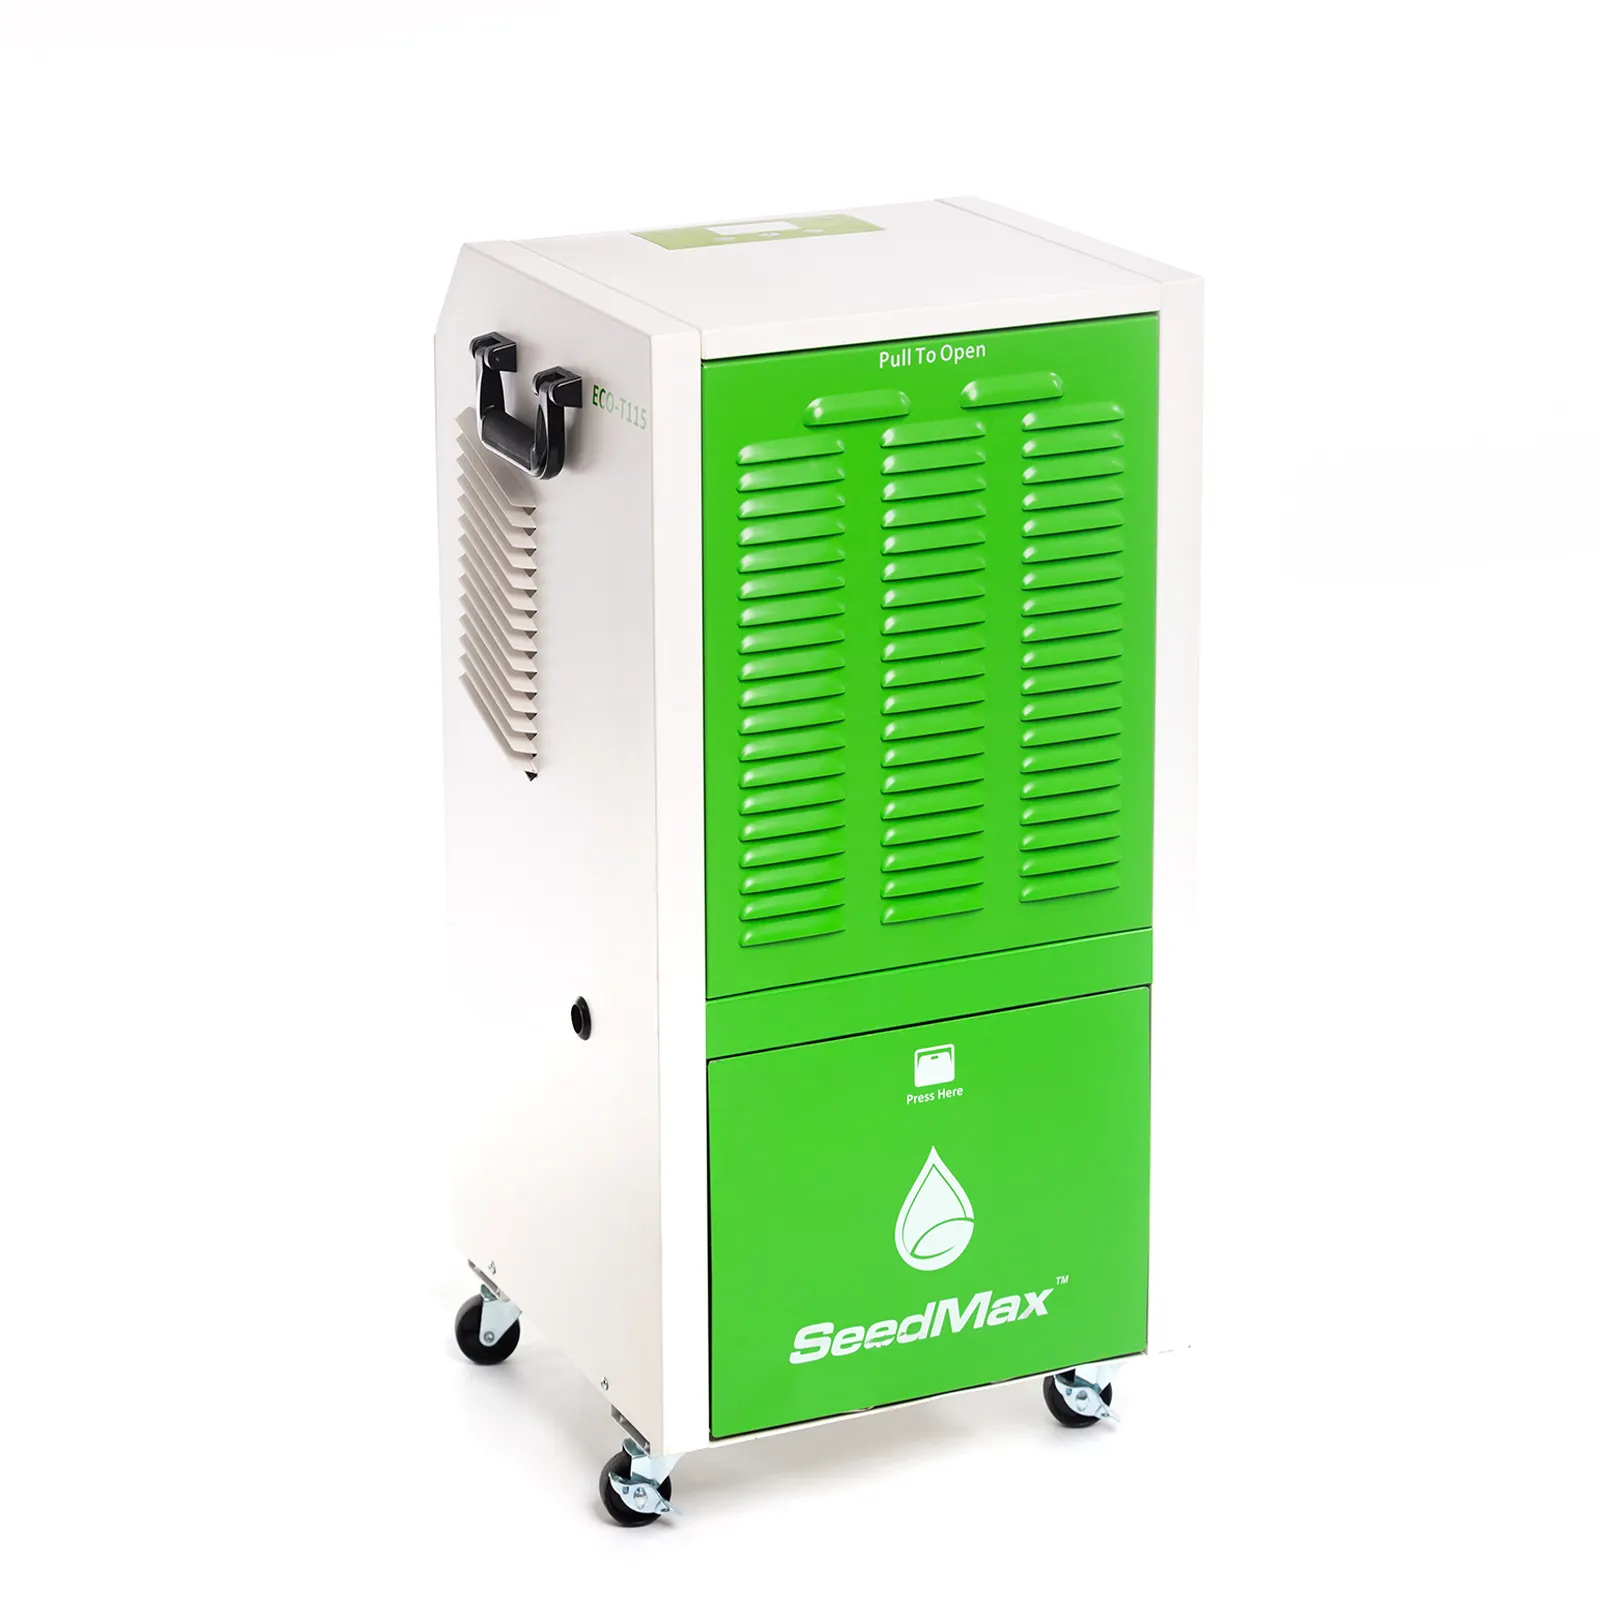 Air Drying Best Large Capacity Greenhouse Industrial Compressor Dehumidifier For Water Damage Restoration